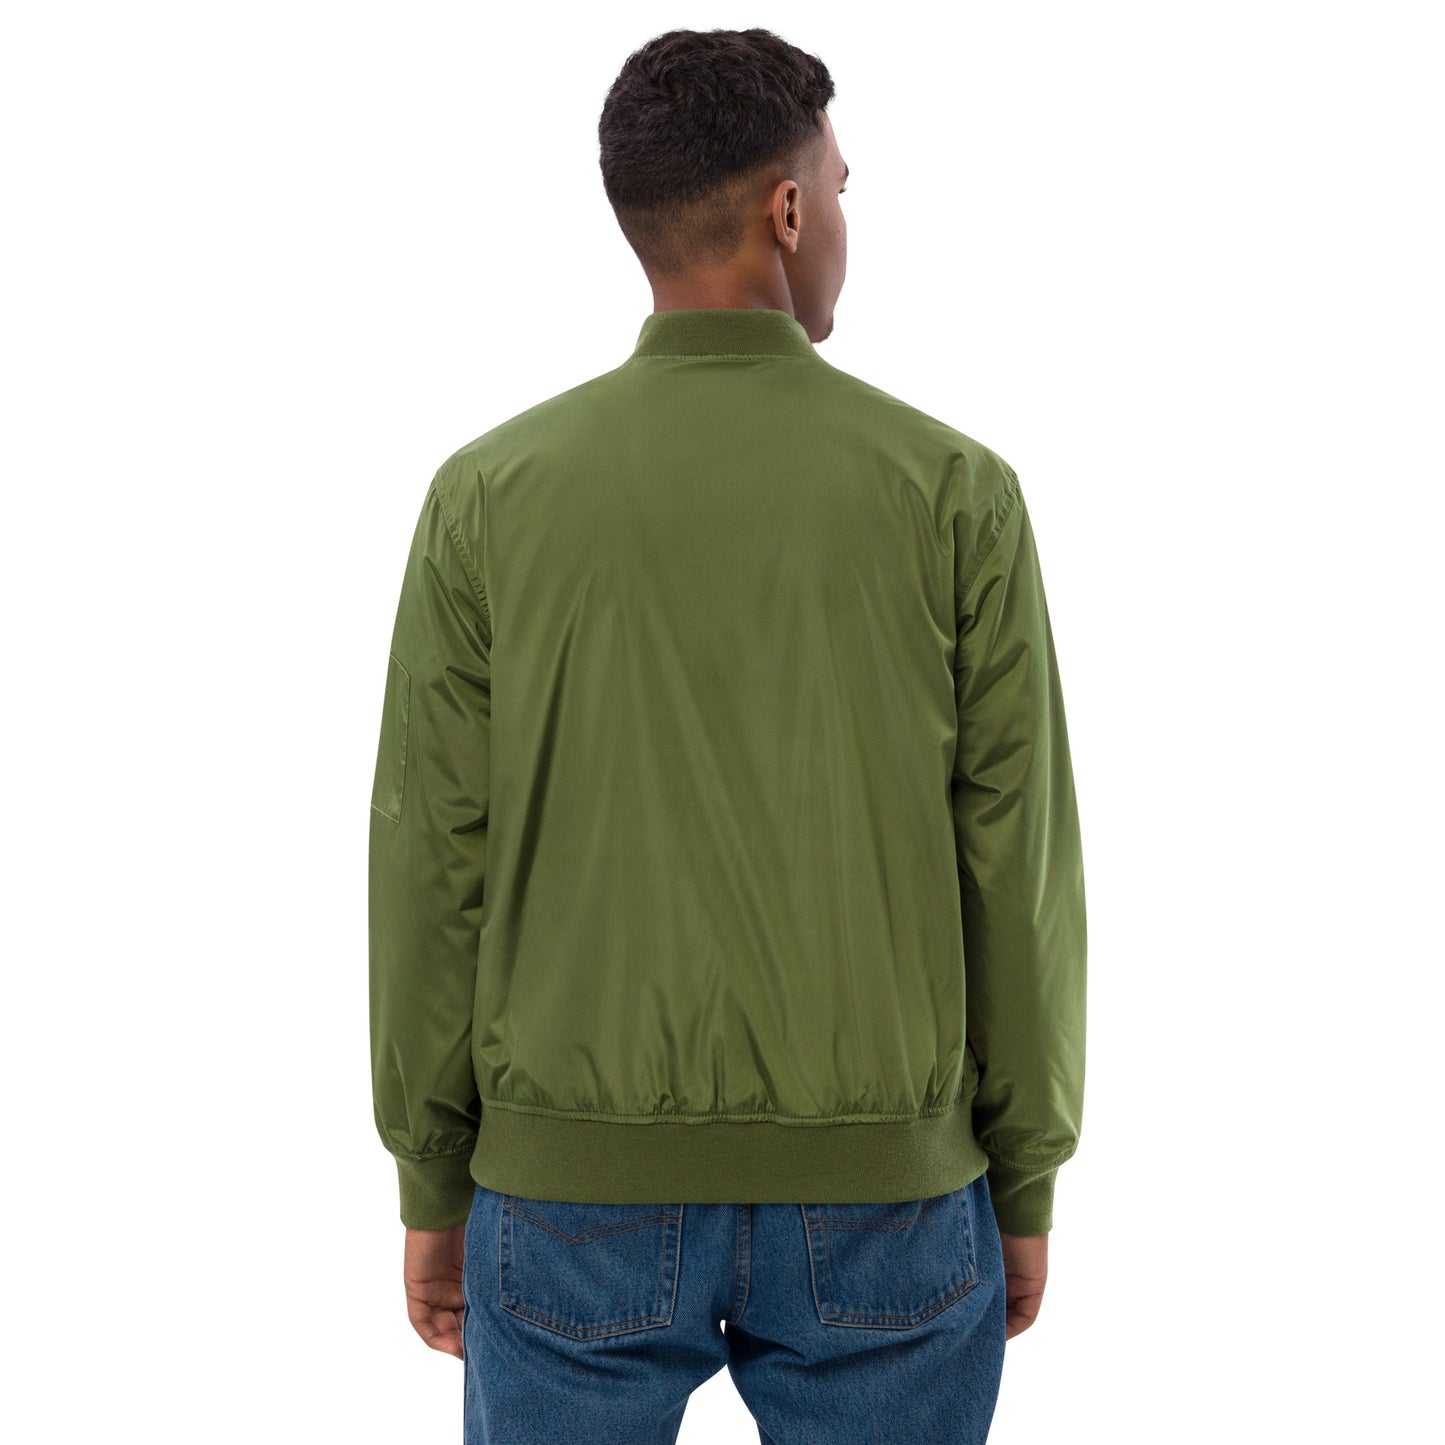 TIME OF VIBES - Premium recycled Blouson Jacket (Green) - €89.00